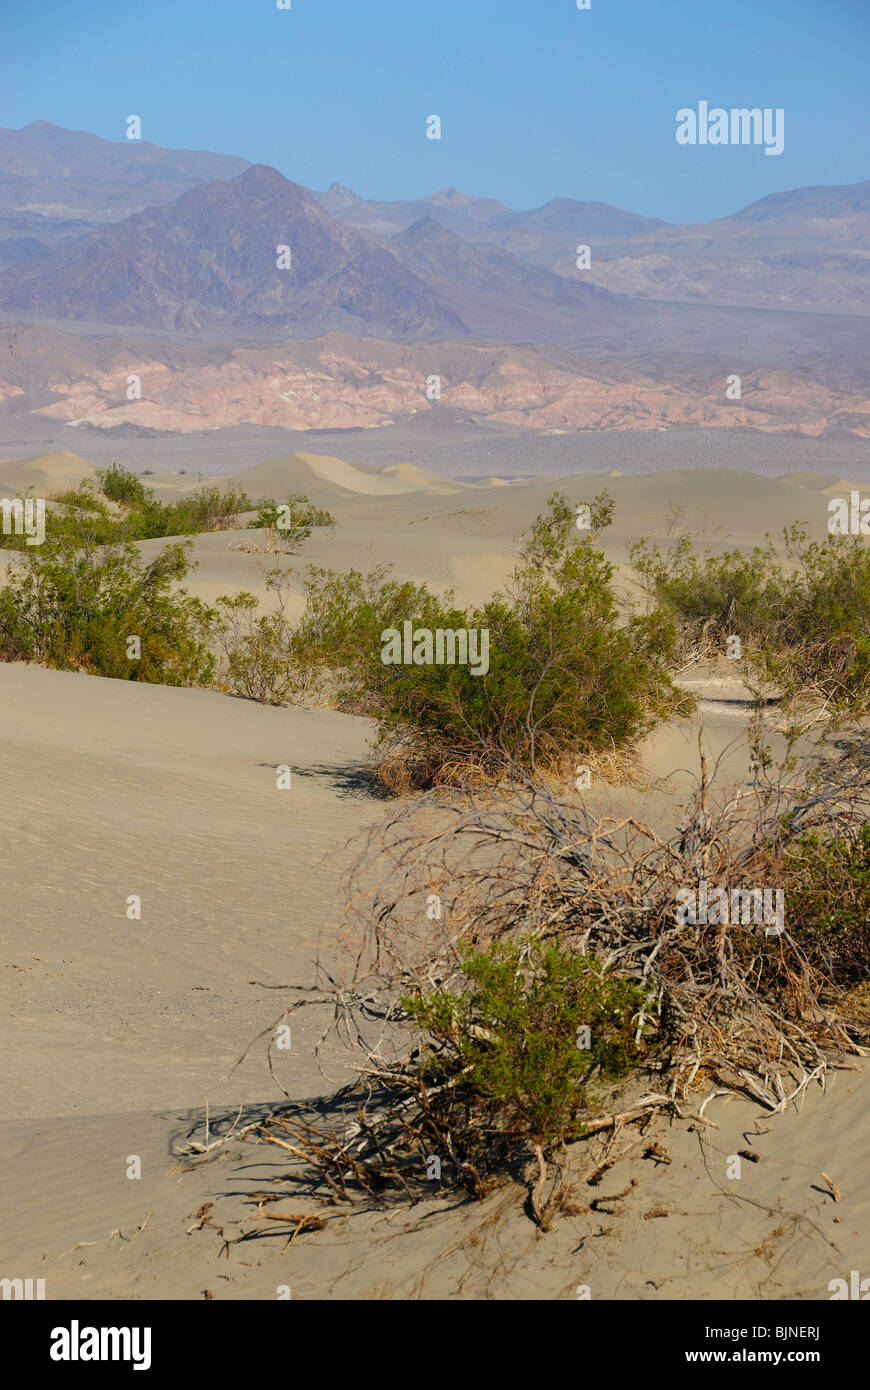 Small green trees in Mesquite Sand Dunes in Death Valley, California state Stock Photo